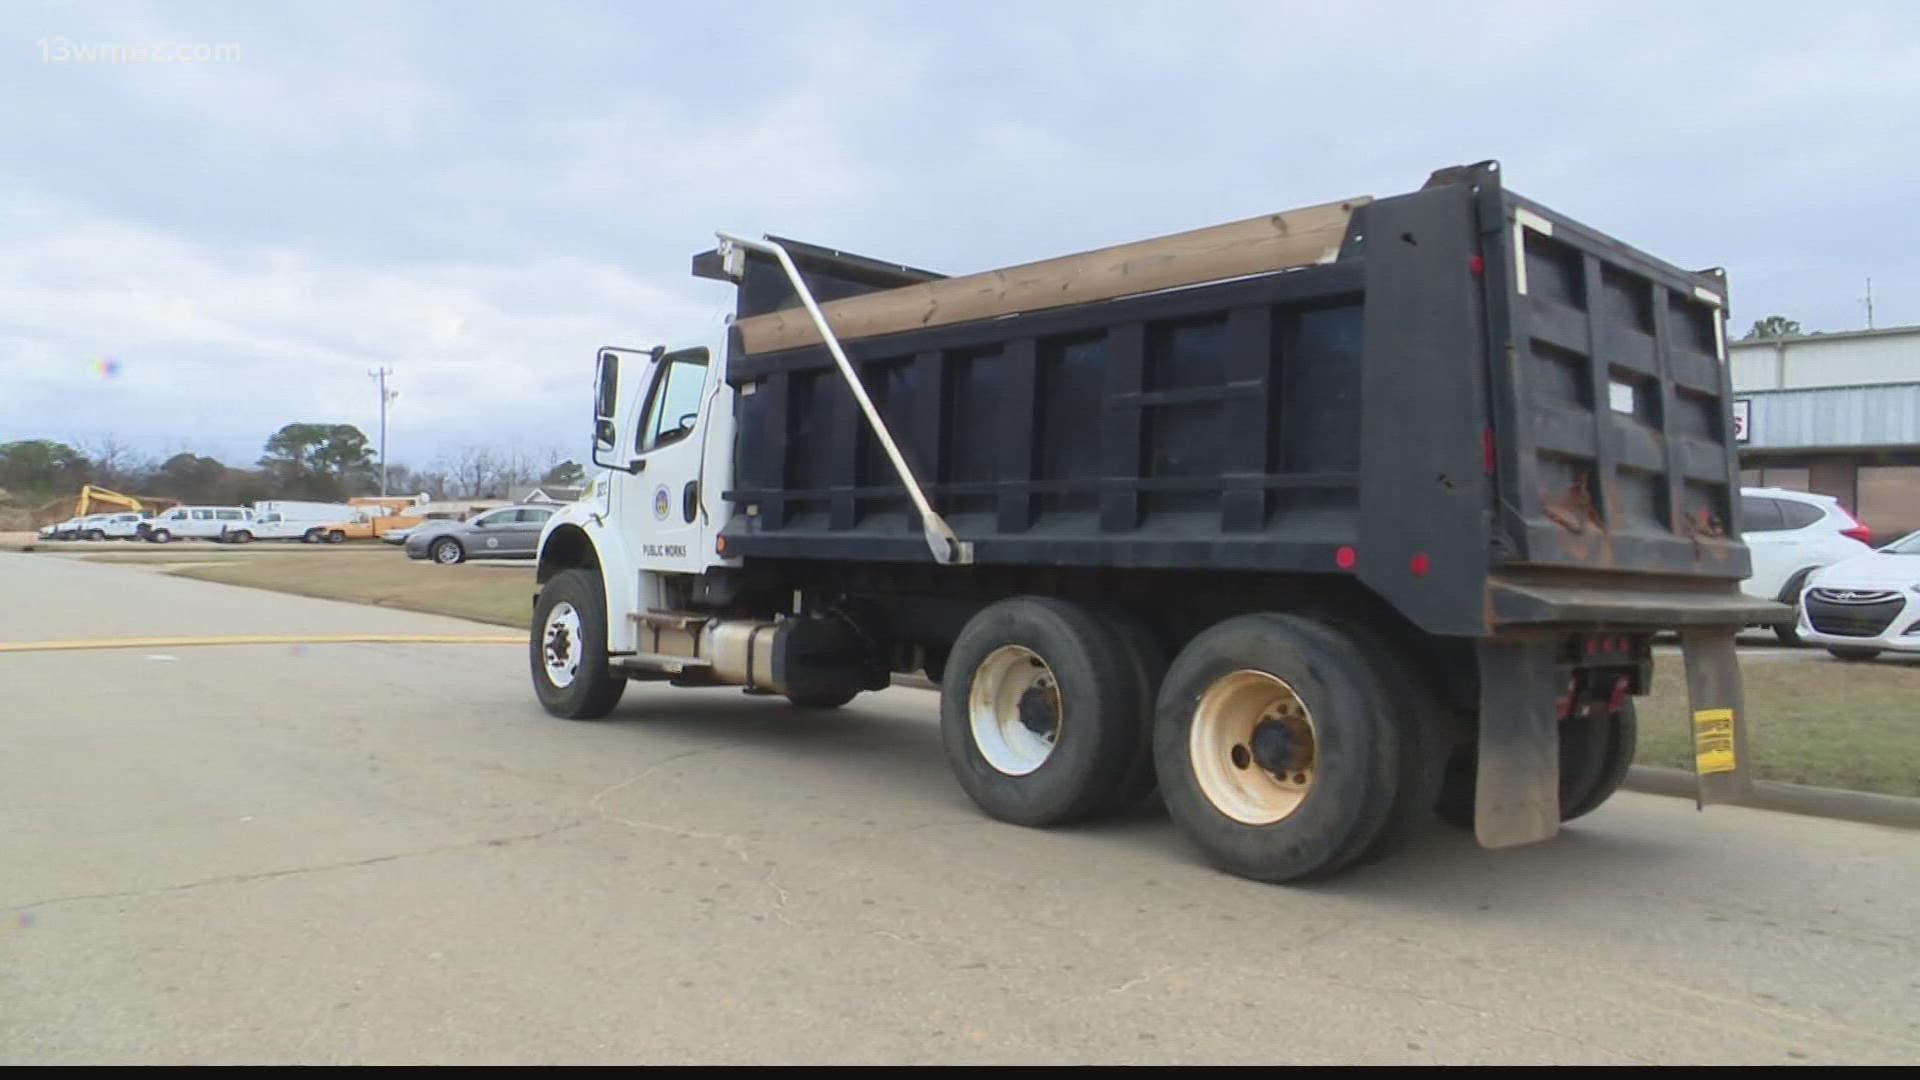 City councilmembers have agreed to jumpstart a program that could help fill up desks and county trucks.